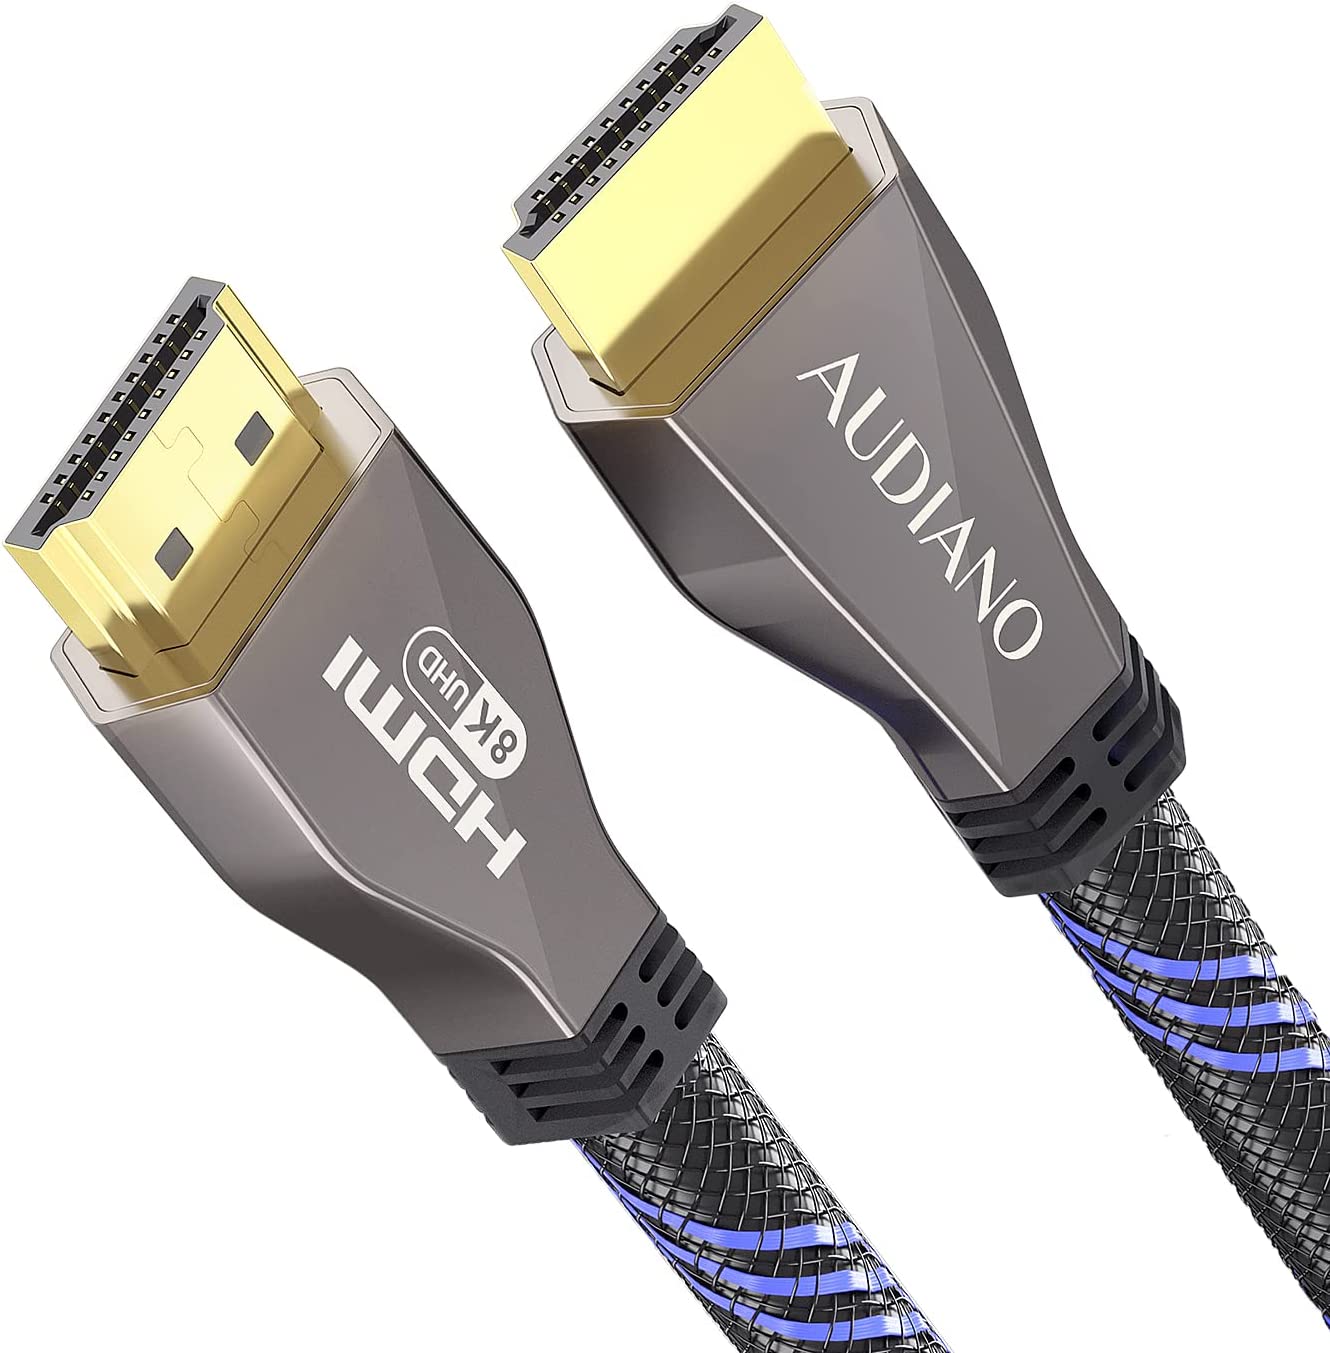  5. AUDIANO 8K HDMI Cable 6.6ft 